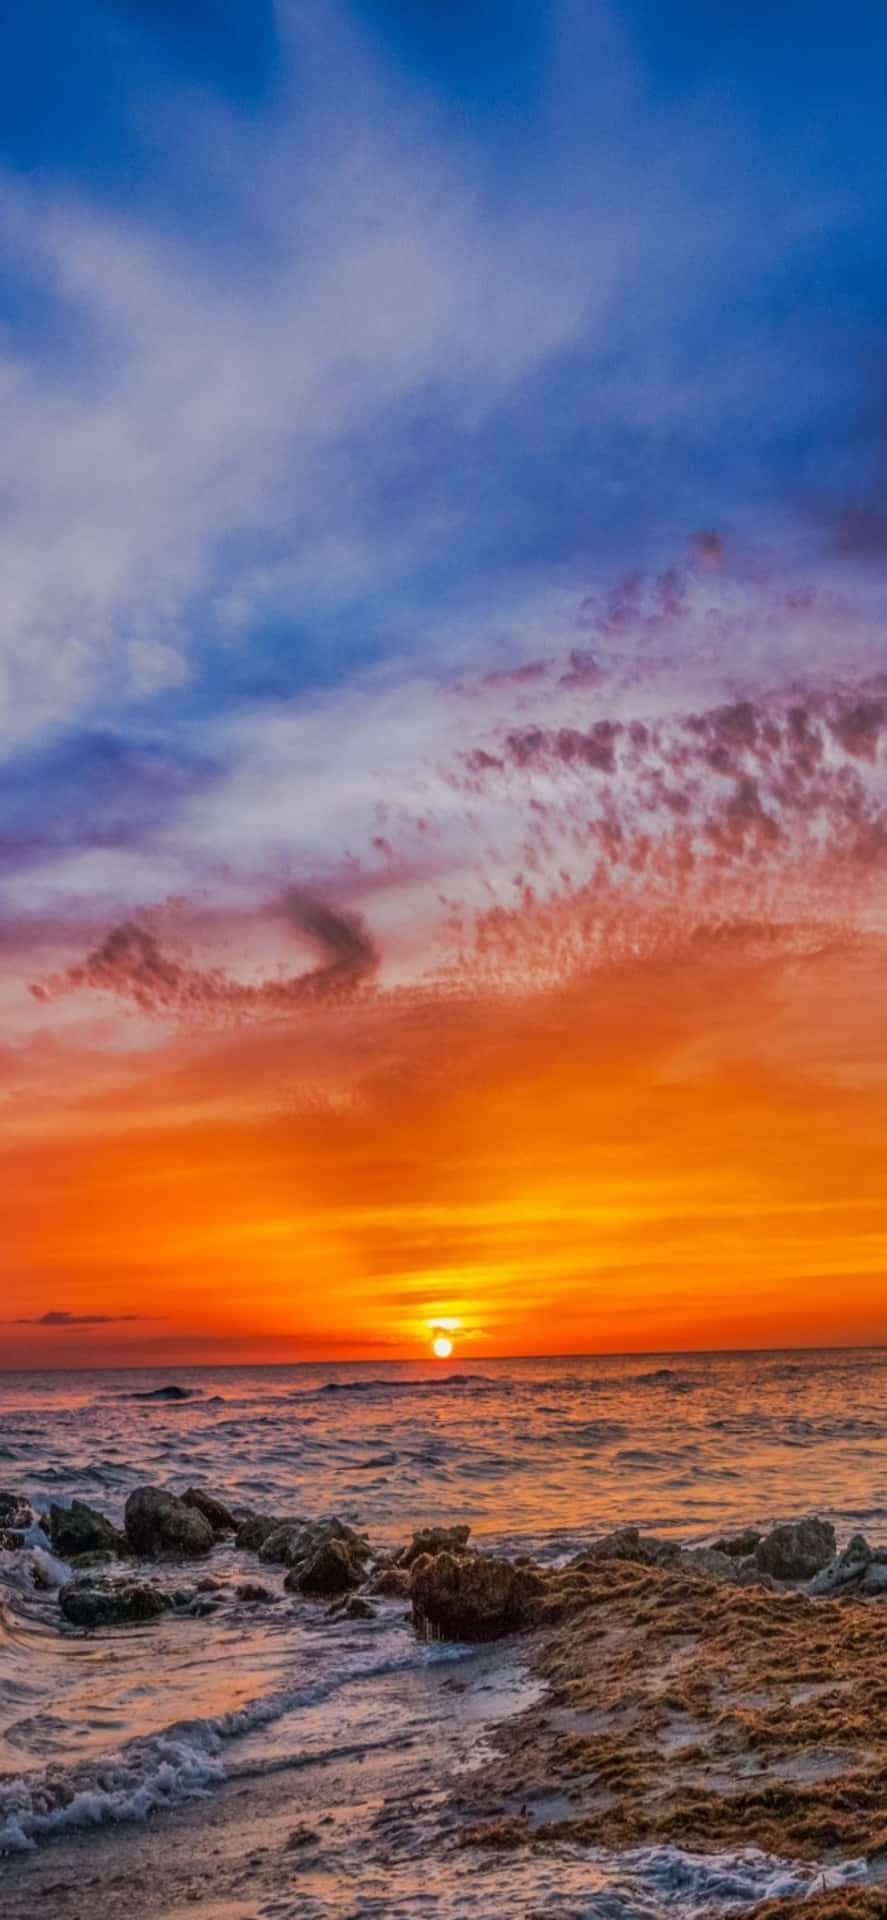 "vibrant Iphone X Wallpaper Capturing An Idyllic Day At The Beach"